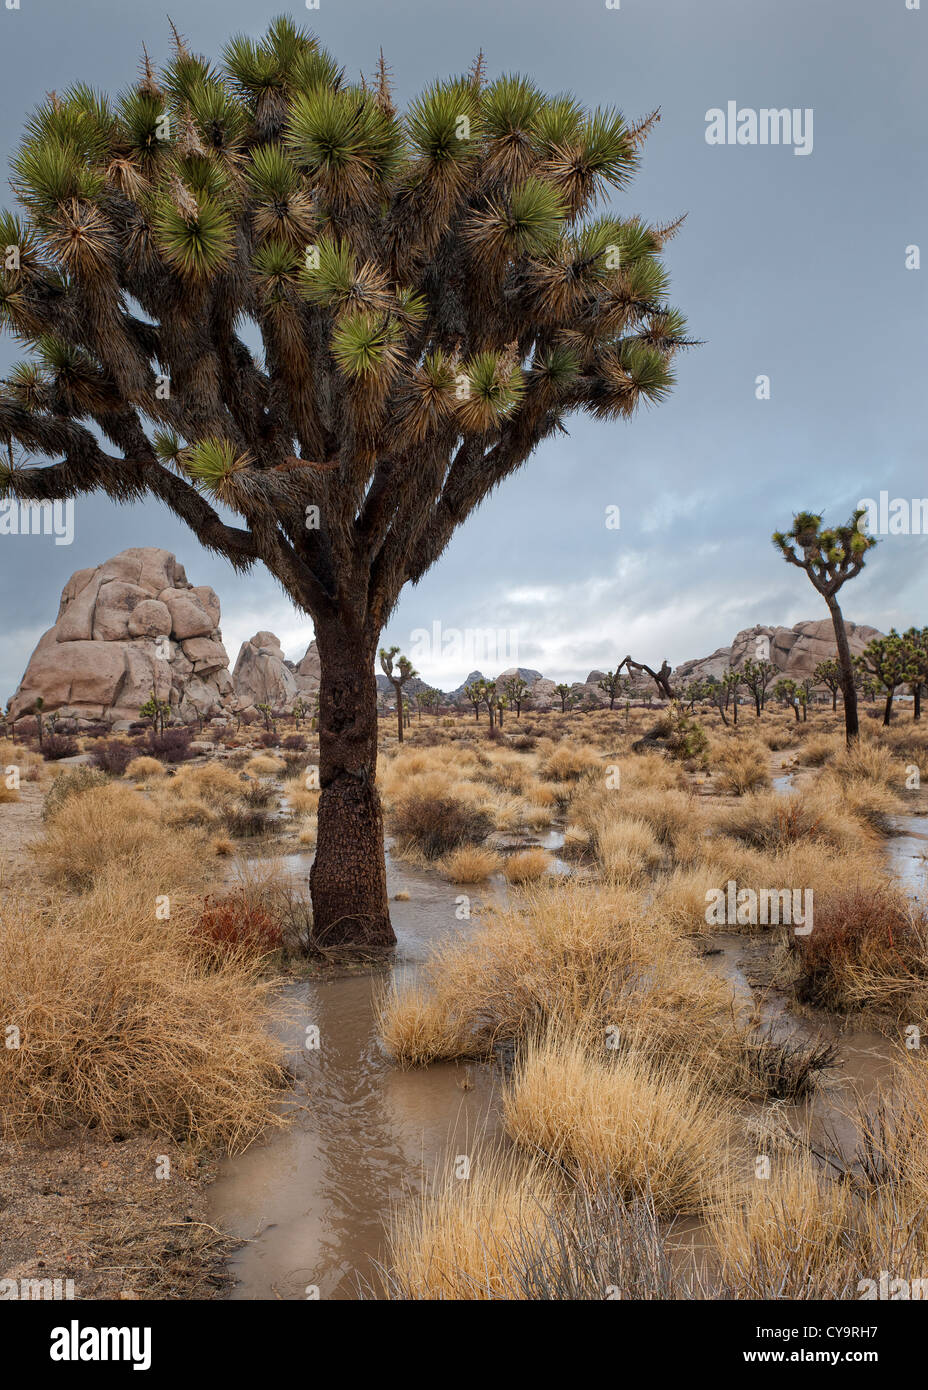 A Joshua Tree (Yucca brevifolia) in the Mojave Desert inundated by surface rain water runoff after a heavy rain storm. Vertical. Stock Photo